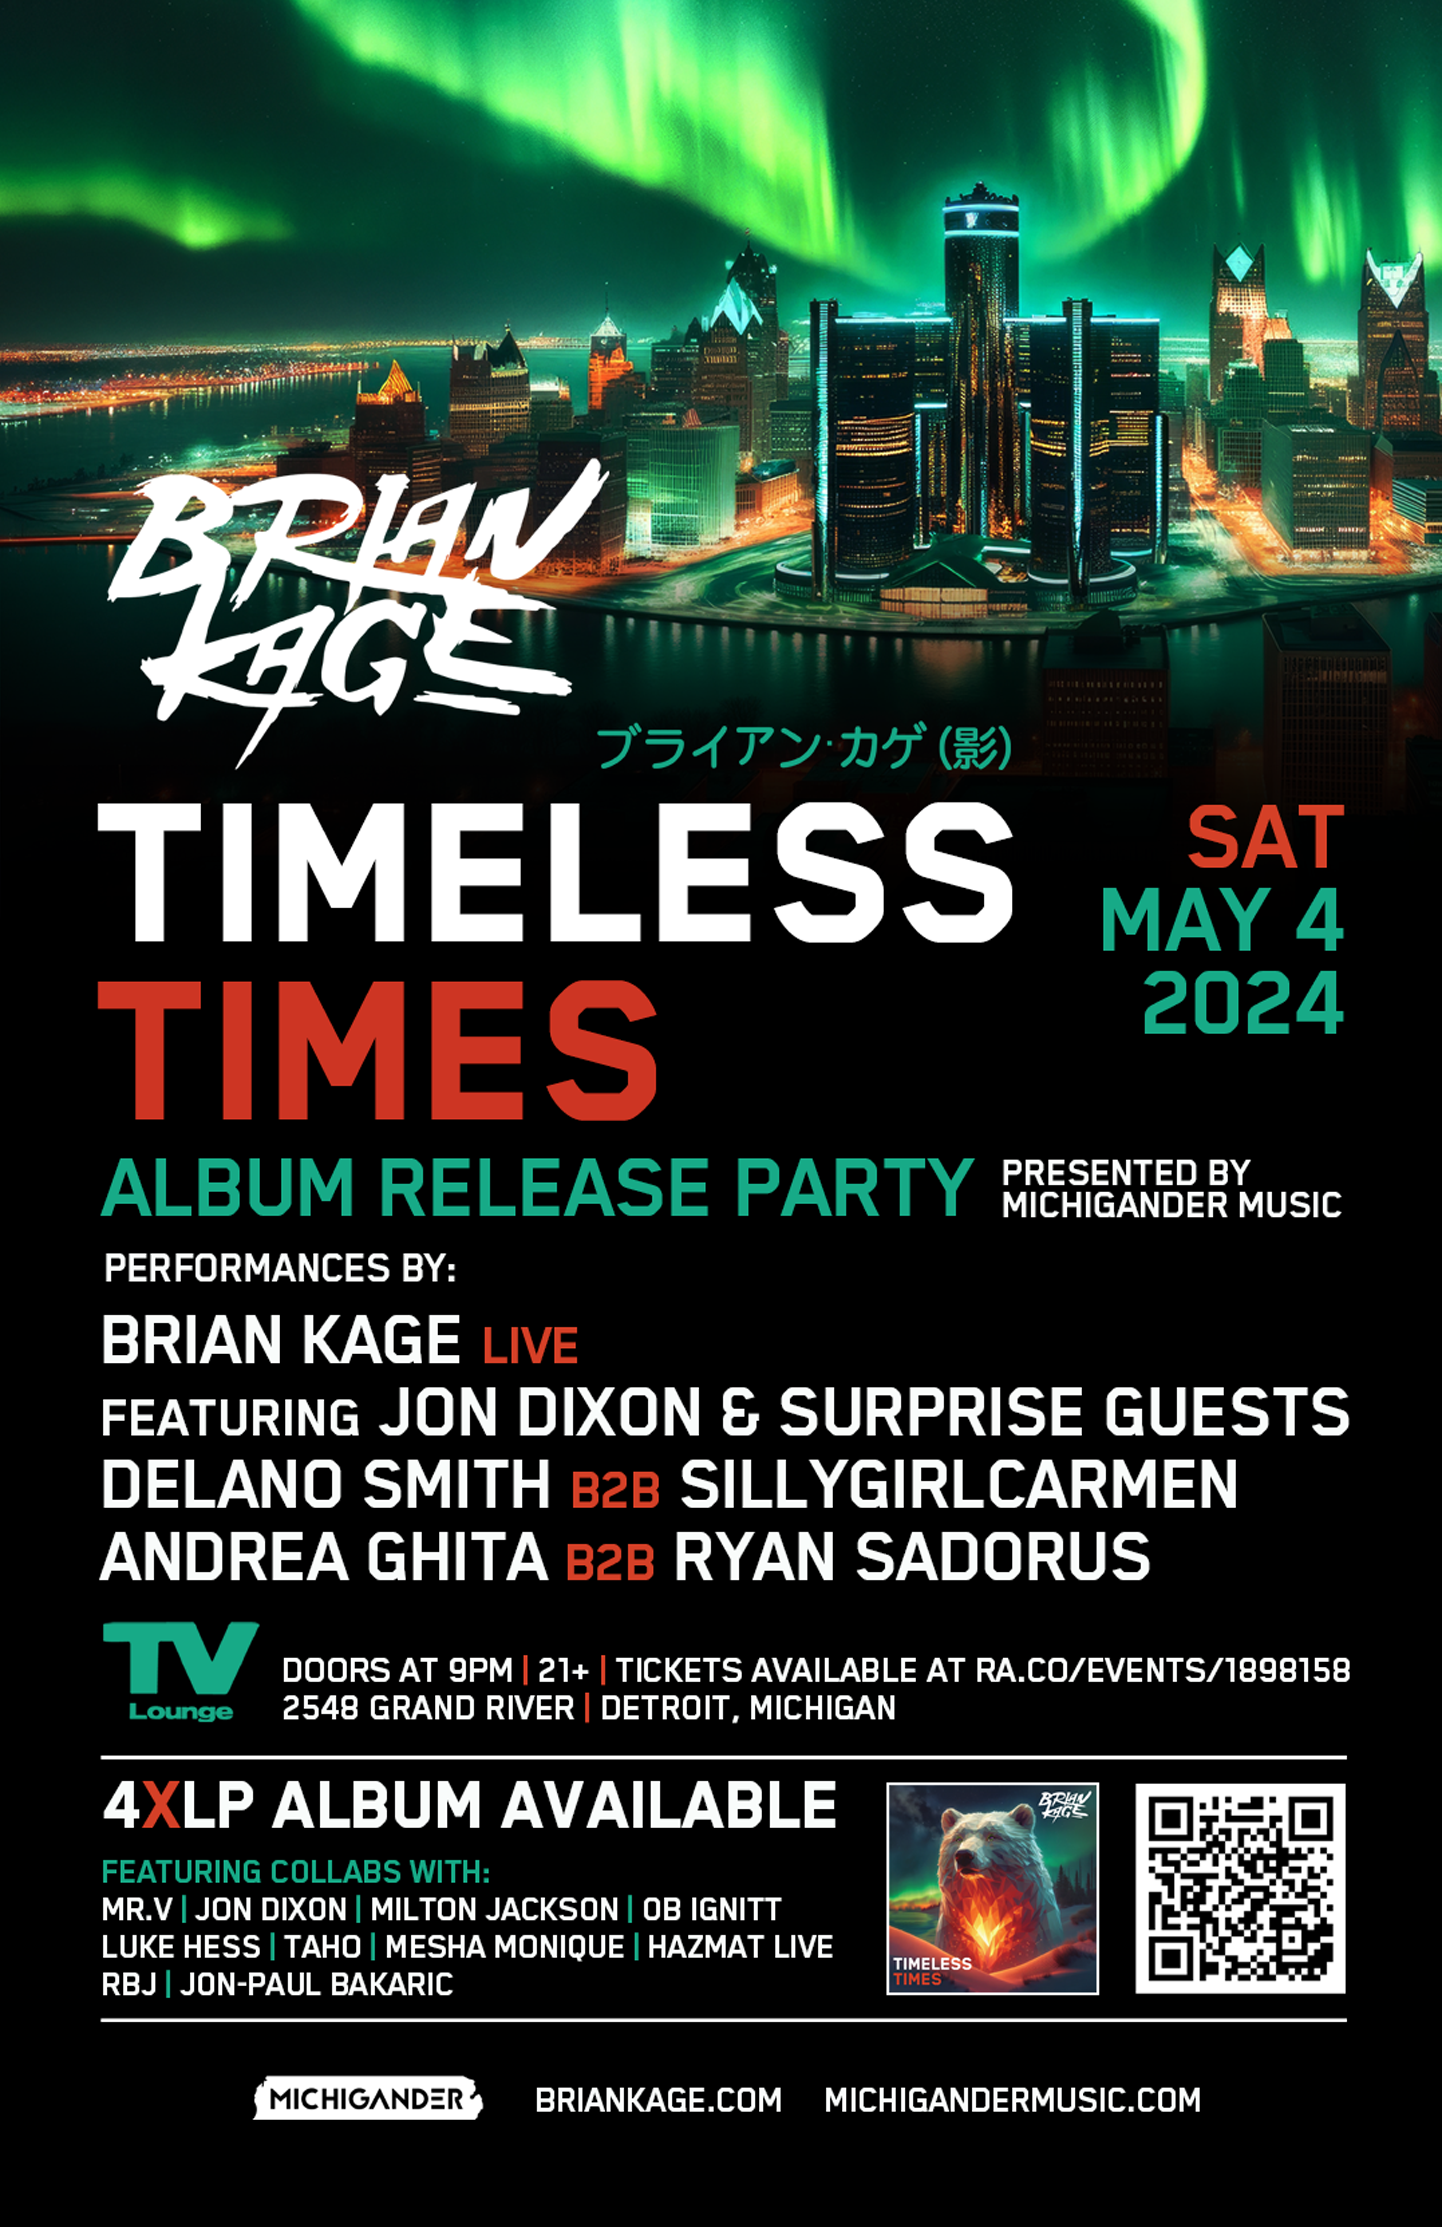 Michigander presents Brian Kage's Timeless Times Album Release Party - フライヤー表